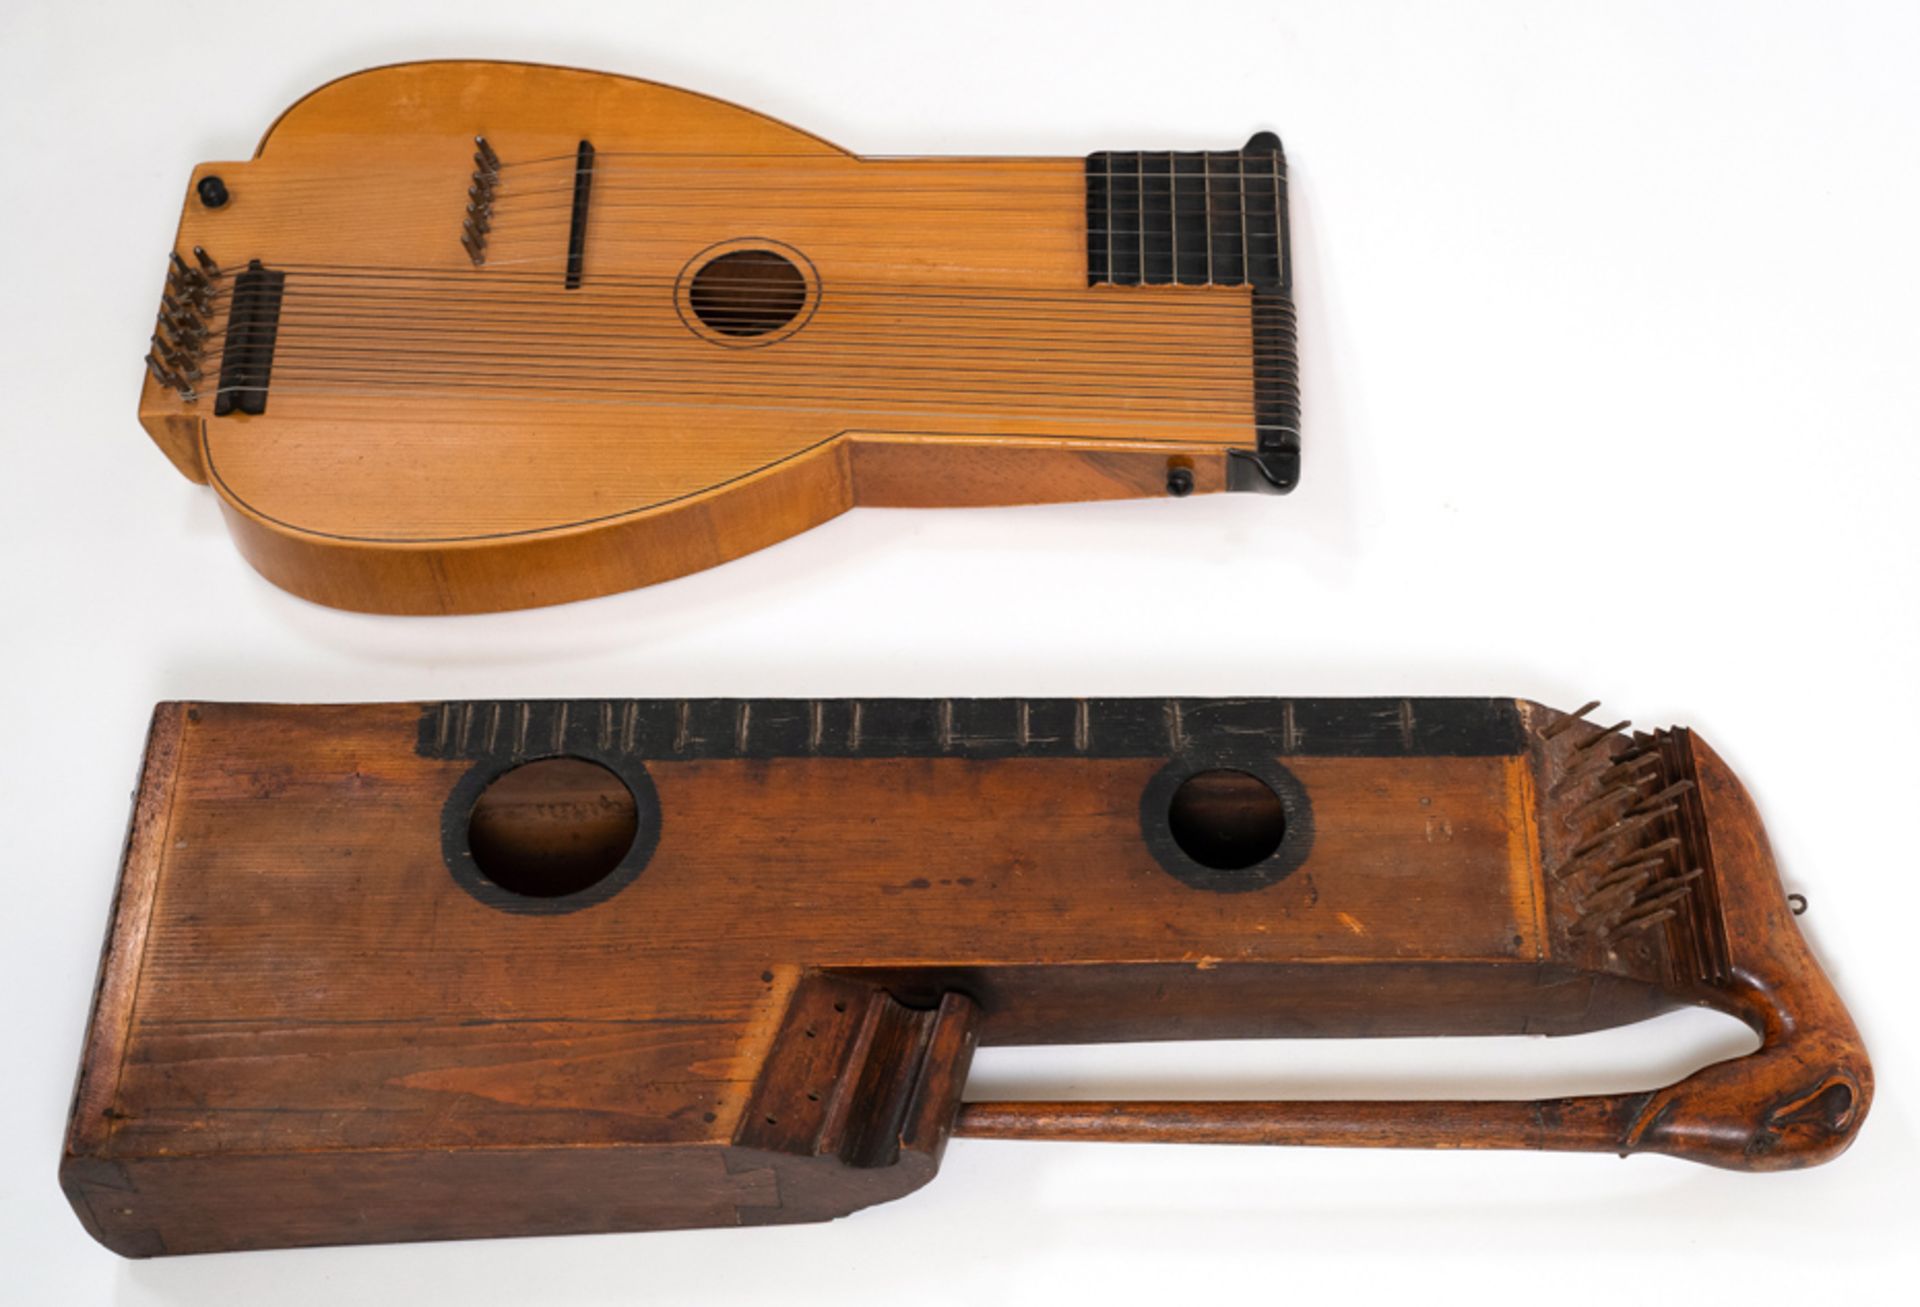 CONVOLUTE: HARP ZITHER AND STOESSEL'S BASSLUTE, 20TH CENTURY